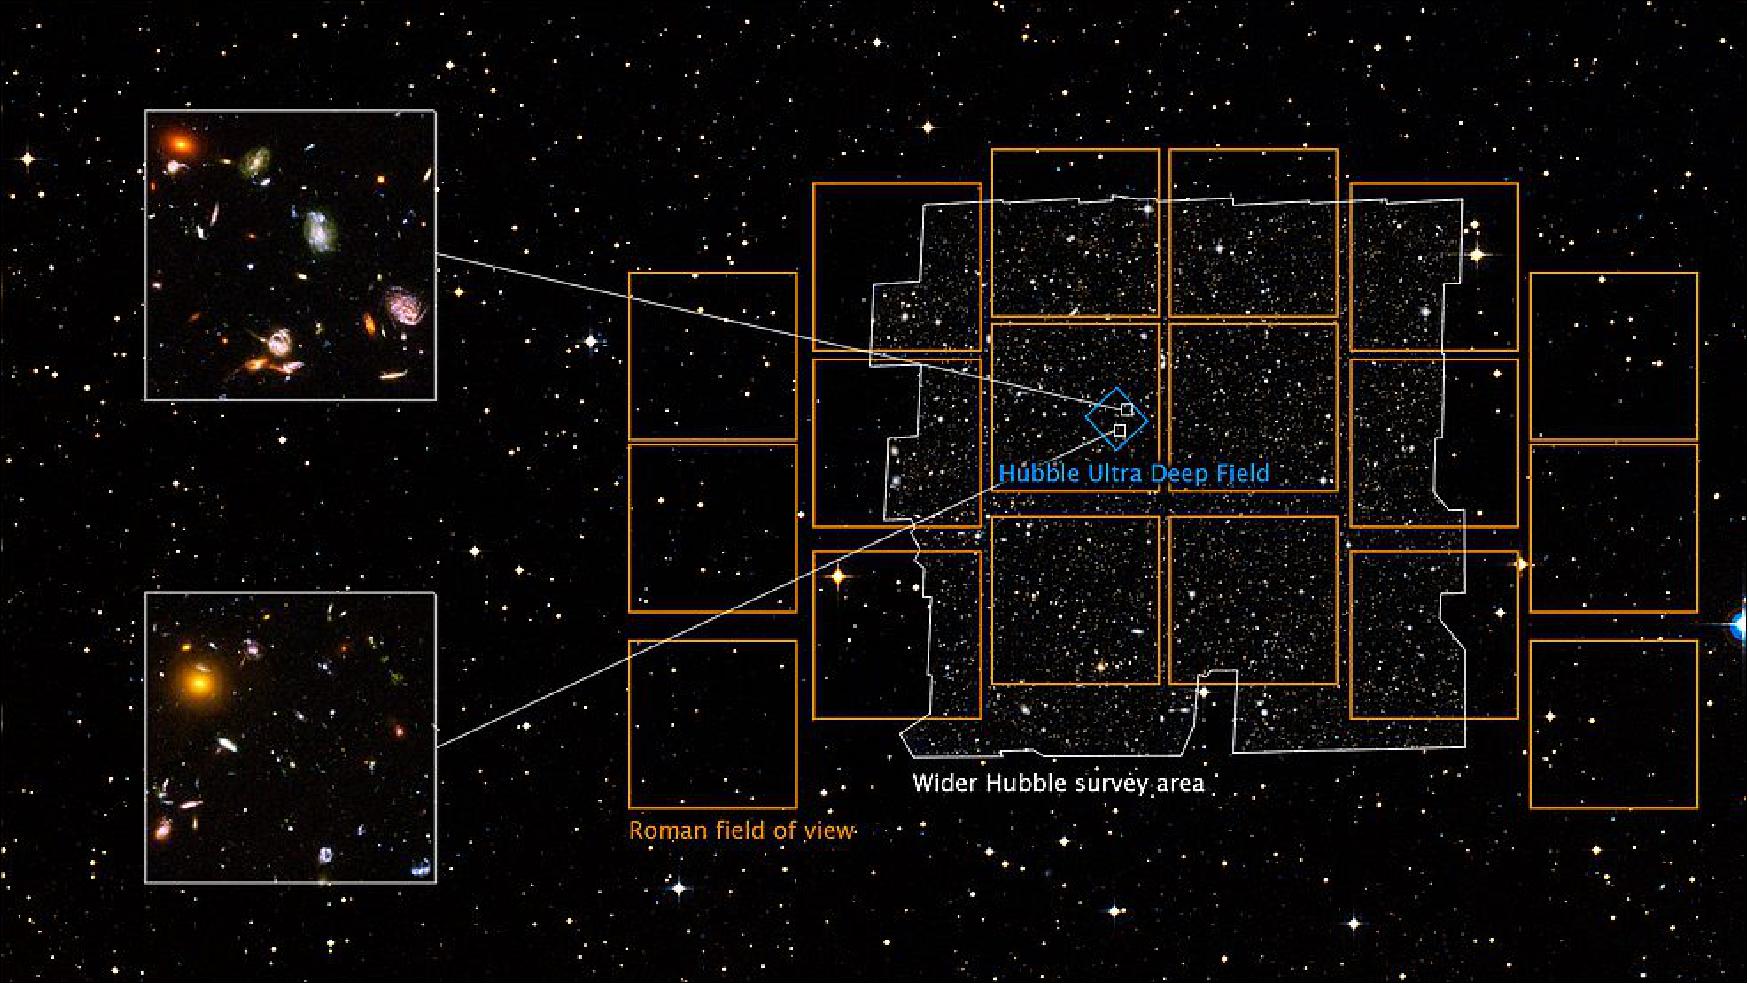 Figure 26: This composite image illustrates the possibility of a Roman Space Telescope “ultra deep field” observation. In a deep field, astronomers collect light from a patch of sky for an extended period of time to reveal the faintest and most distant objects. This view centers on the Hubble Ultra Deep Field (outlined in blue), which represents the deepest portrait of the universe ever achieved by humankind, at visible, ultraviolet and near-infrared wavelengths. Two insets reveal stunning details of the galaxies within the field. Beyond the Hubble Ultra Deep Field, additional observations obtained over the past two decades have filled in the surrounding space. These wider Hubble observations reveal over 265,000 galaxies, but are much shallower than the Hubble Ultra Deep Field in terms of the most distant galaxies observed. These Hubble images are overlaid on an even wider view using ground-based data from the Digitized Sky Survey. An orange outline shows the field of view of NASA’s upcoming Nancy Grace Roman Space Telescope. Roman’s 18 detectors will be able to observe an area of sky at least 100 times larger than the Hubble Ultra Deep Field at one time, with the same crisp sharpness as Hubble (image credits: NASA, ESA, and A. Koekemoer (STScI); Acknowledgement: Digitized Sky Survey)